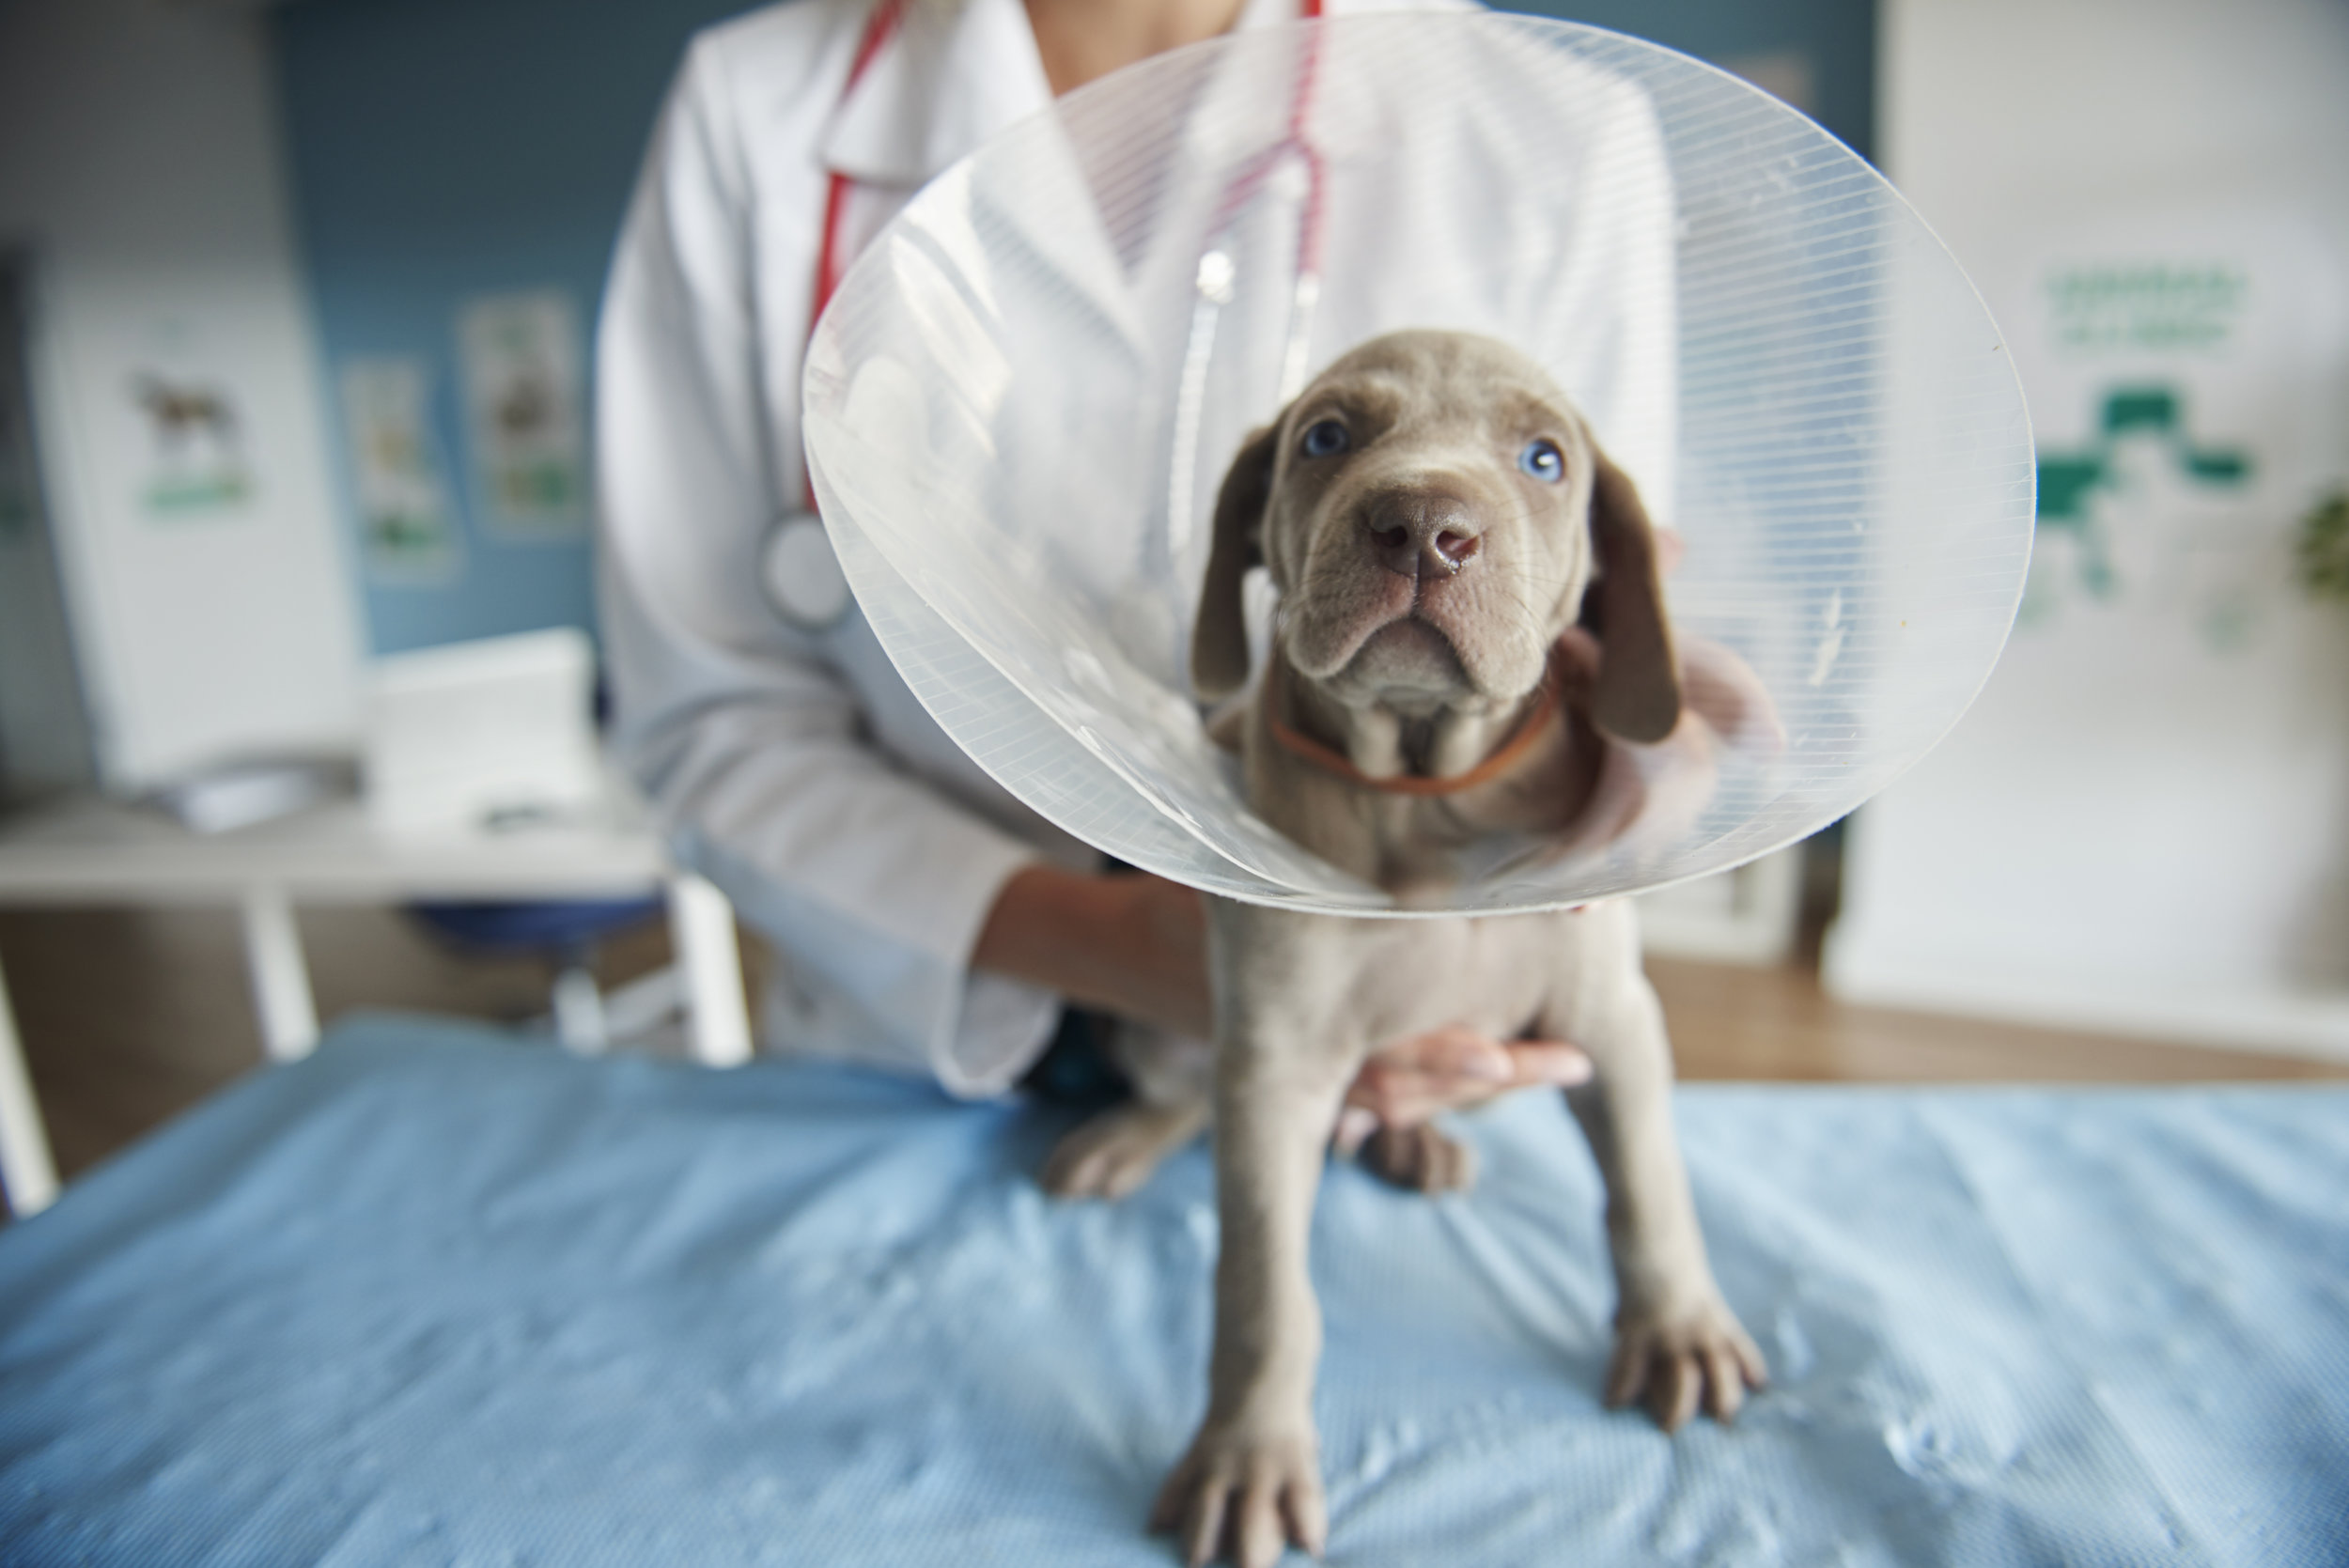 where to get dog spayed for free near me